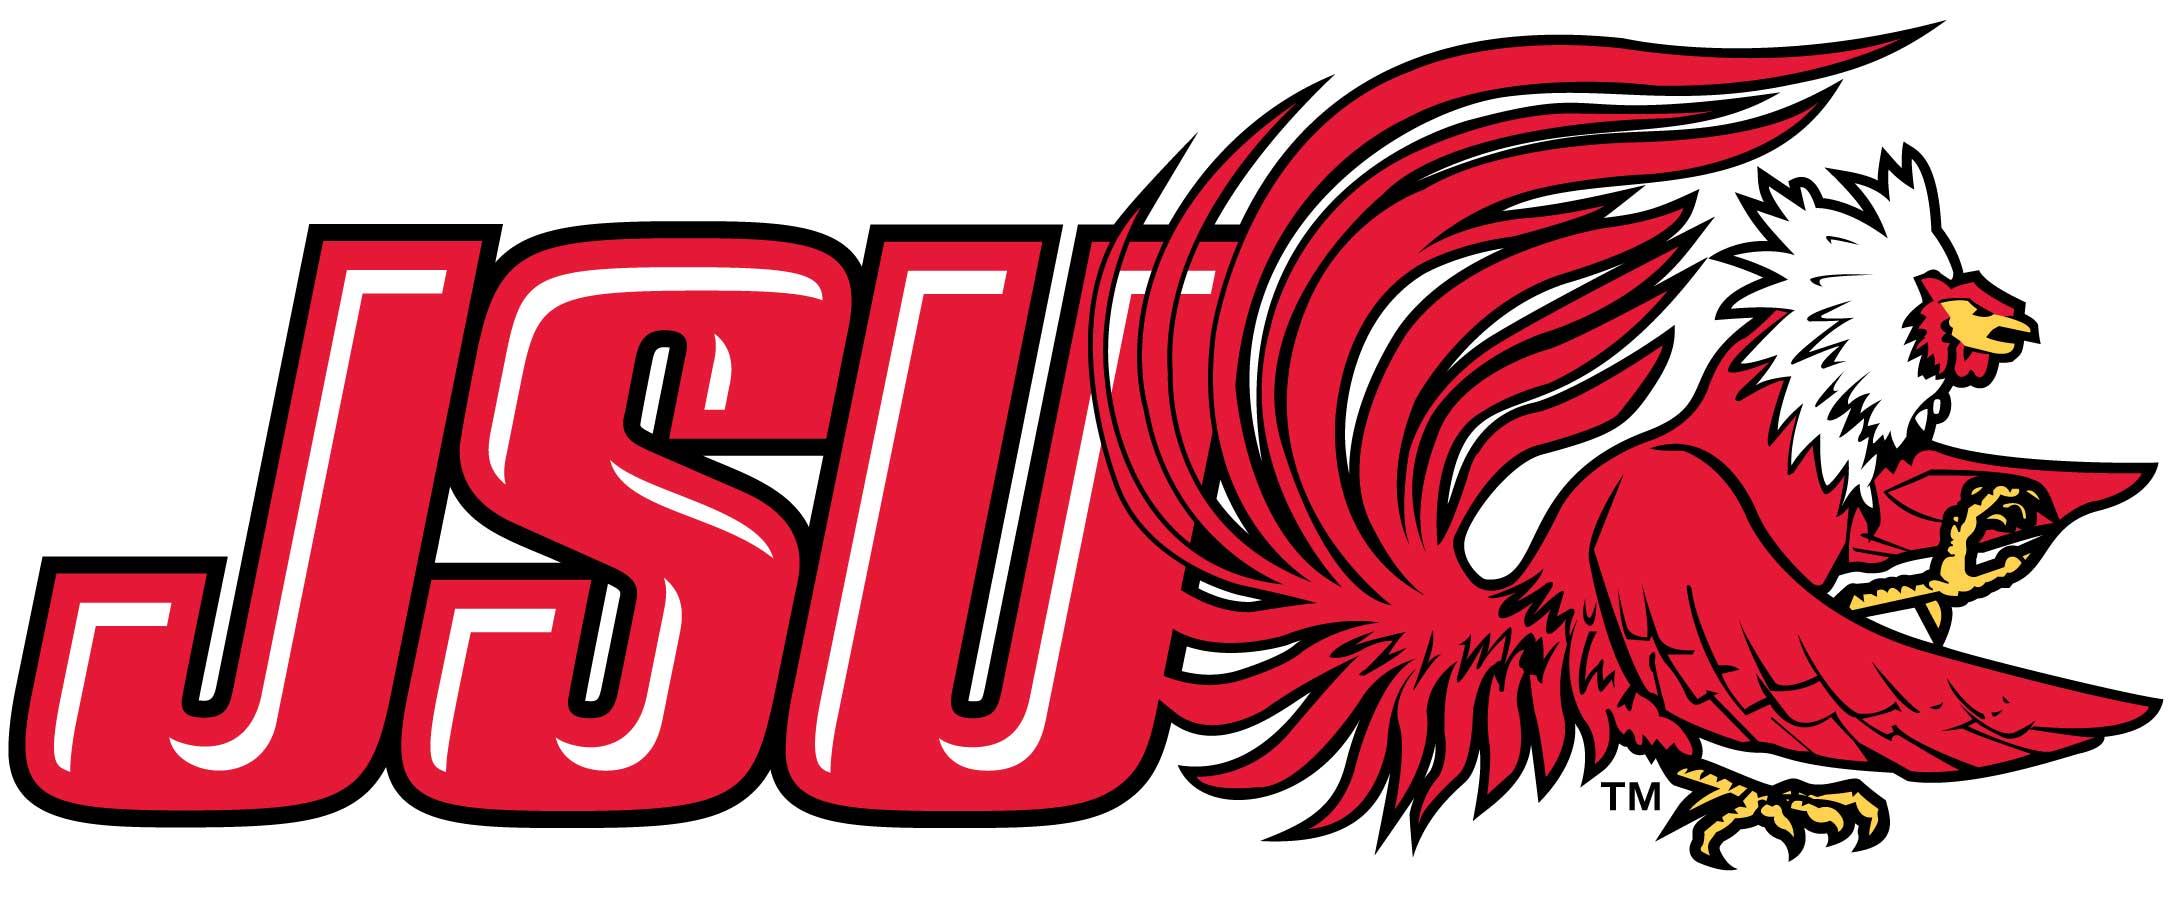 JSU Logo - Jacksonville State Buying Mobile Homes to House Students After